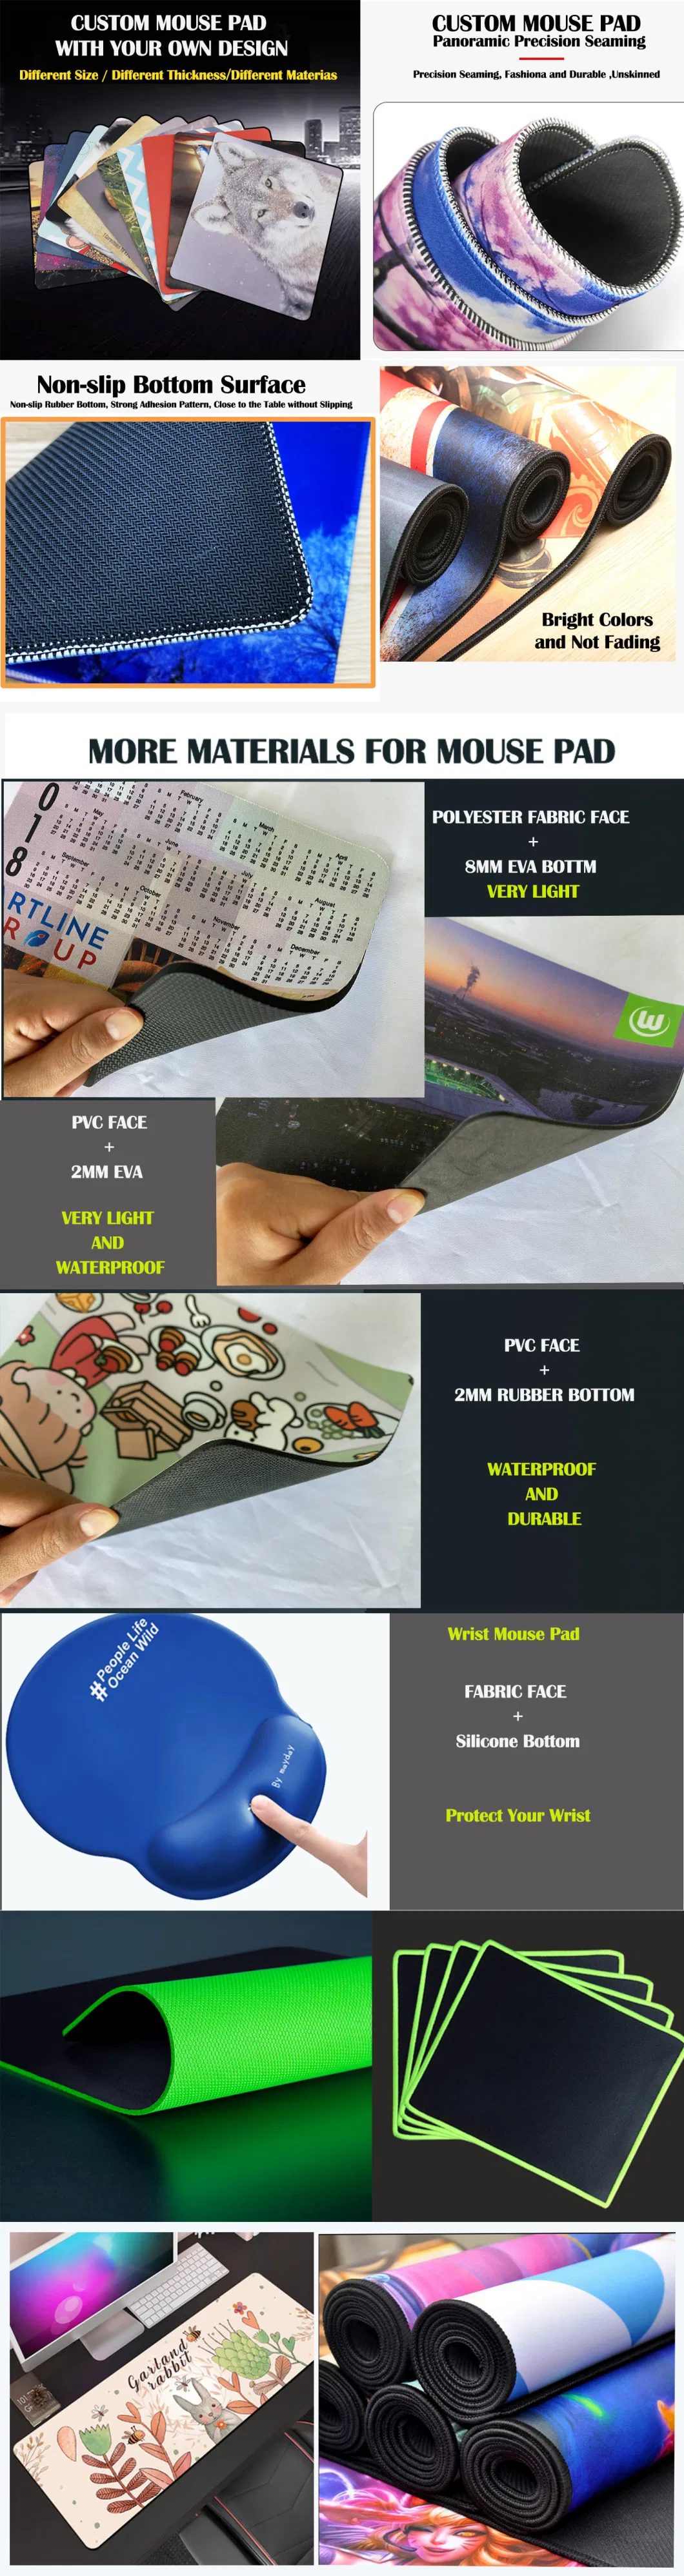 High Quality Rubber Sublimation Style with Wrist Rest Made Oversize Logo Print Neopreno Soft Custom Size Mouse Pad